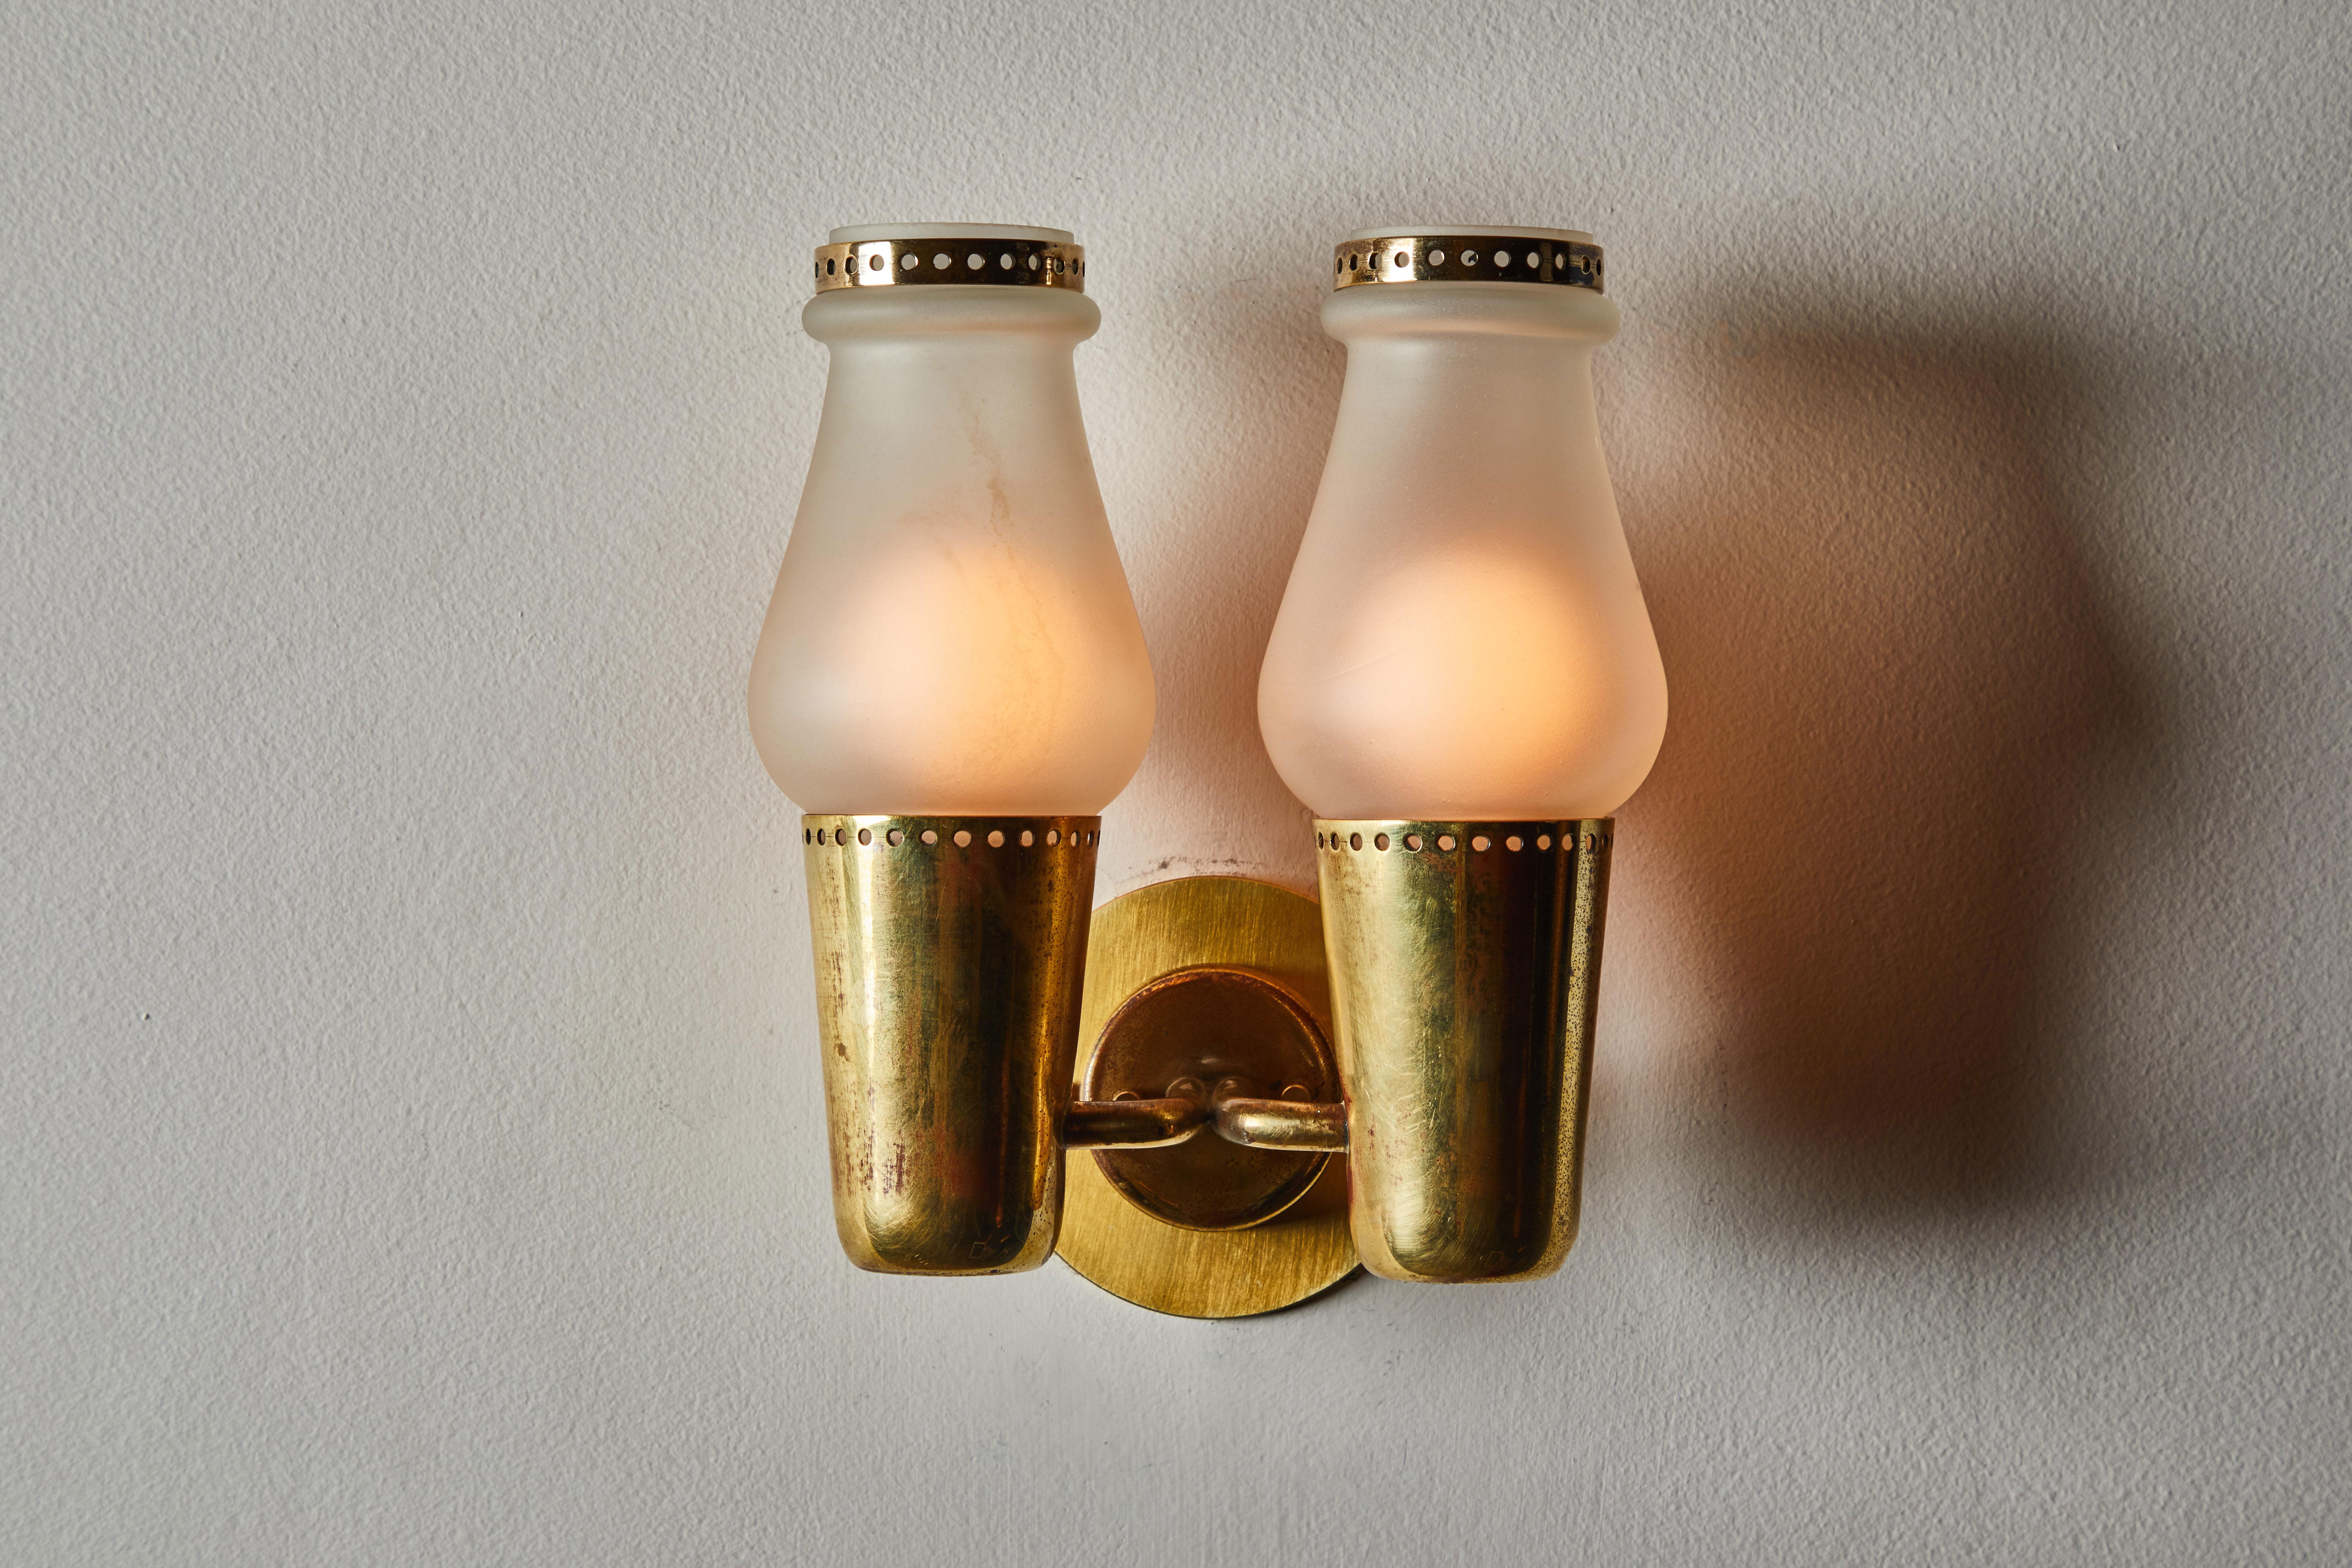 One pair of sconces by Gino Sarfatti. Manufactured in Italy, circa 1950s. Glass diffusers with brass hardware. Rewired for US junction boxes. Each light takes one E27 100w maximum bulb. Only one pair available